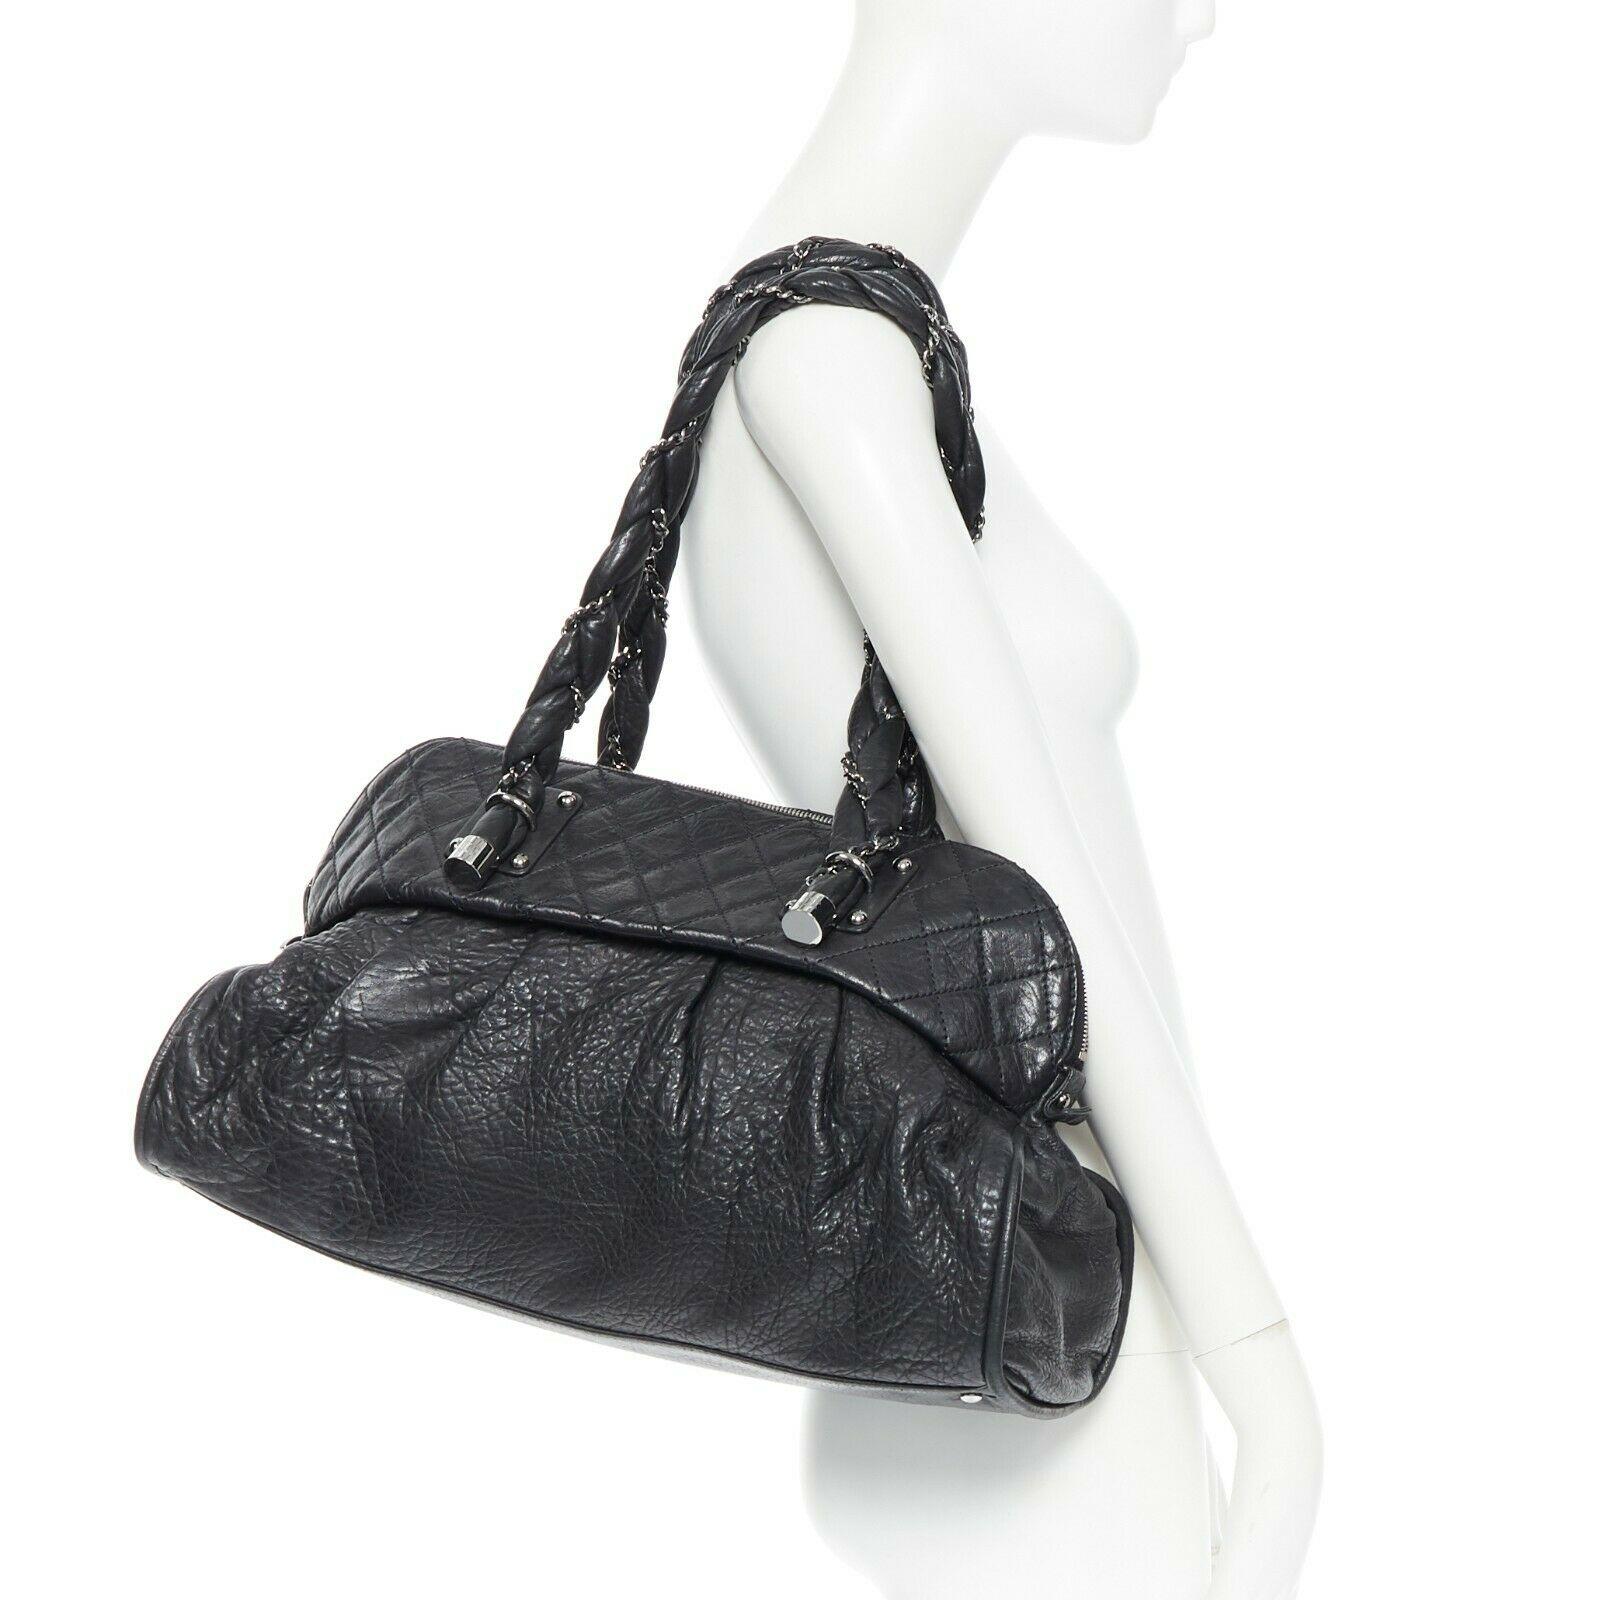 CHANEL black diamond quilted pebbled leather 2.55 braid strap shoulder bag
Brand: CHANEL
Designer: Karl Lagerfeld
Model Name / Style: Dumpling bag
Material: Leather
Color: Black
Pattern: Solid
Closure: Zip
Lining material: Leather
Extra Detail: